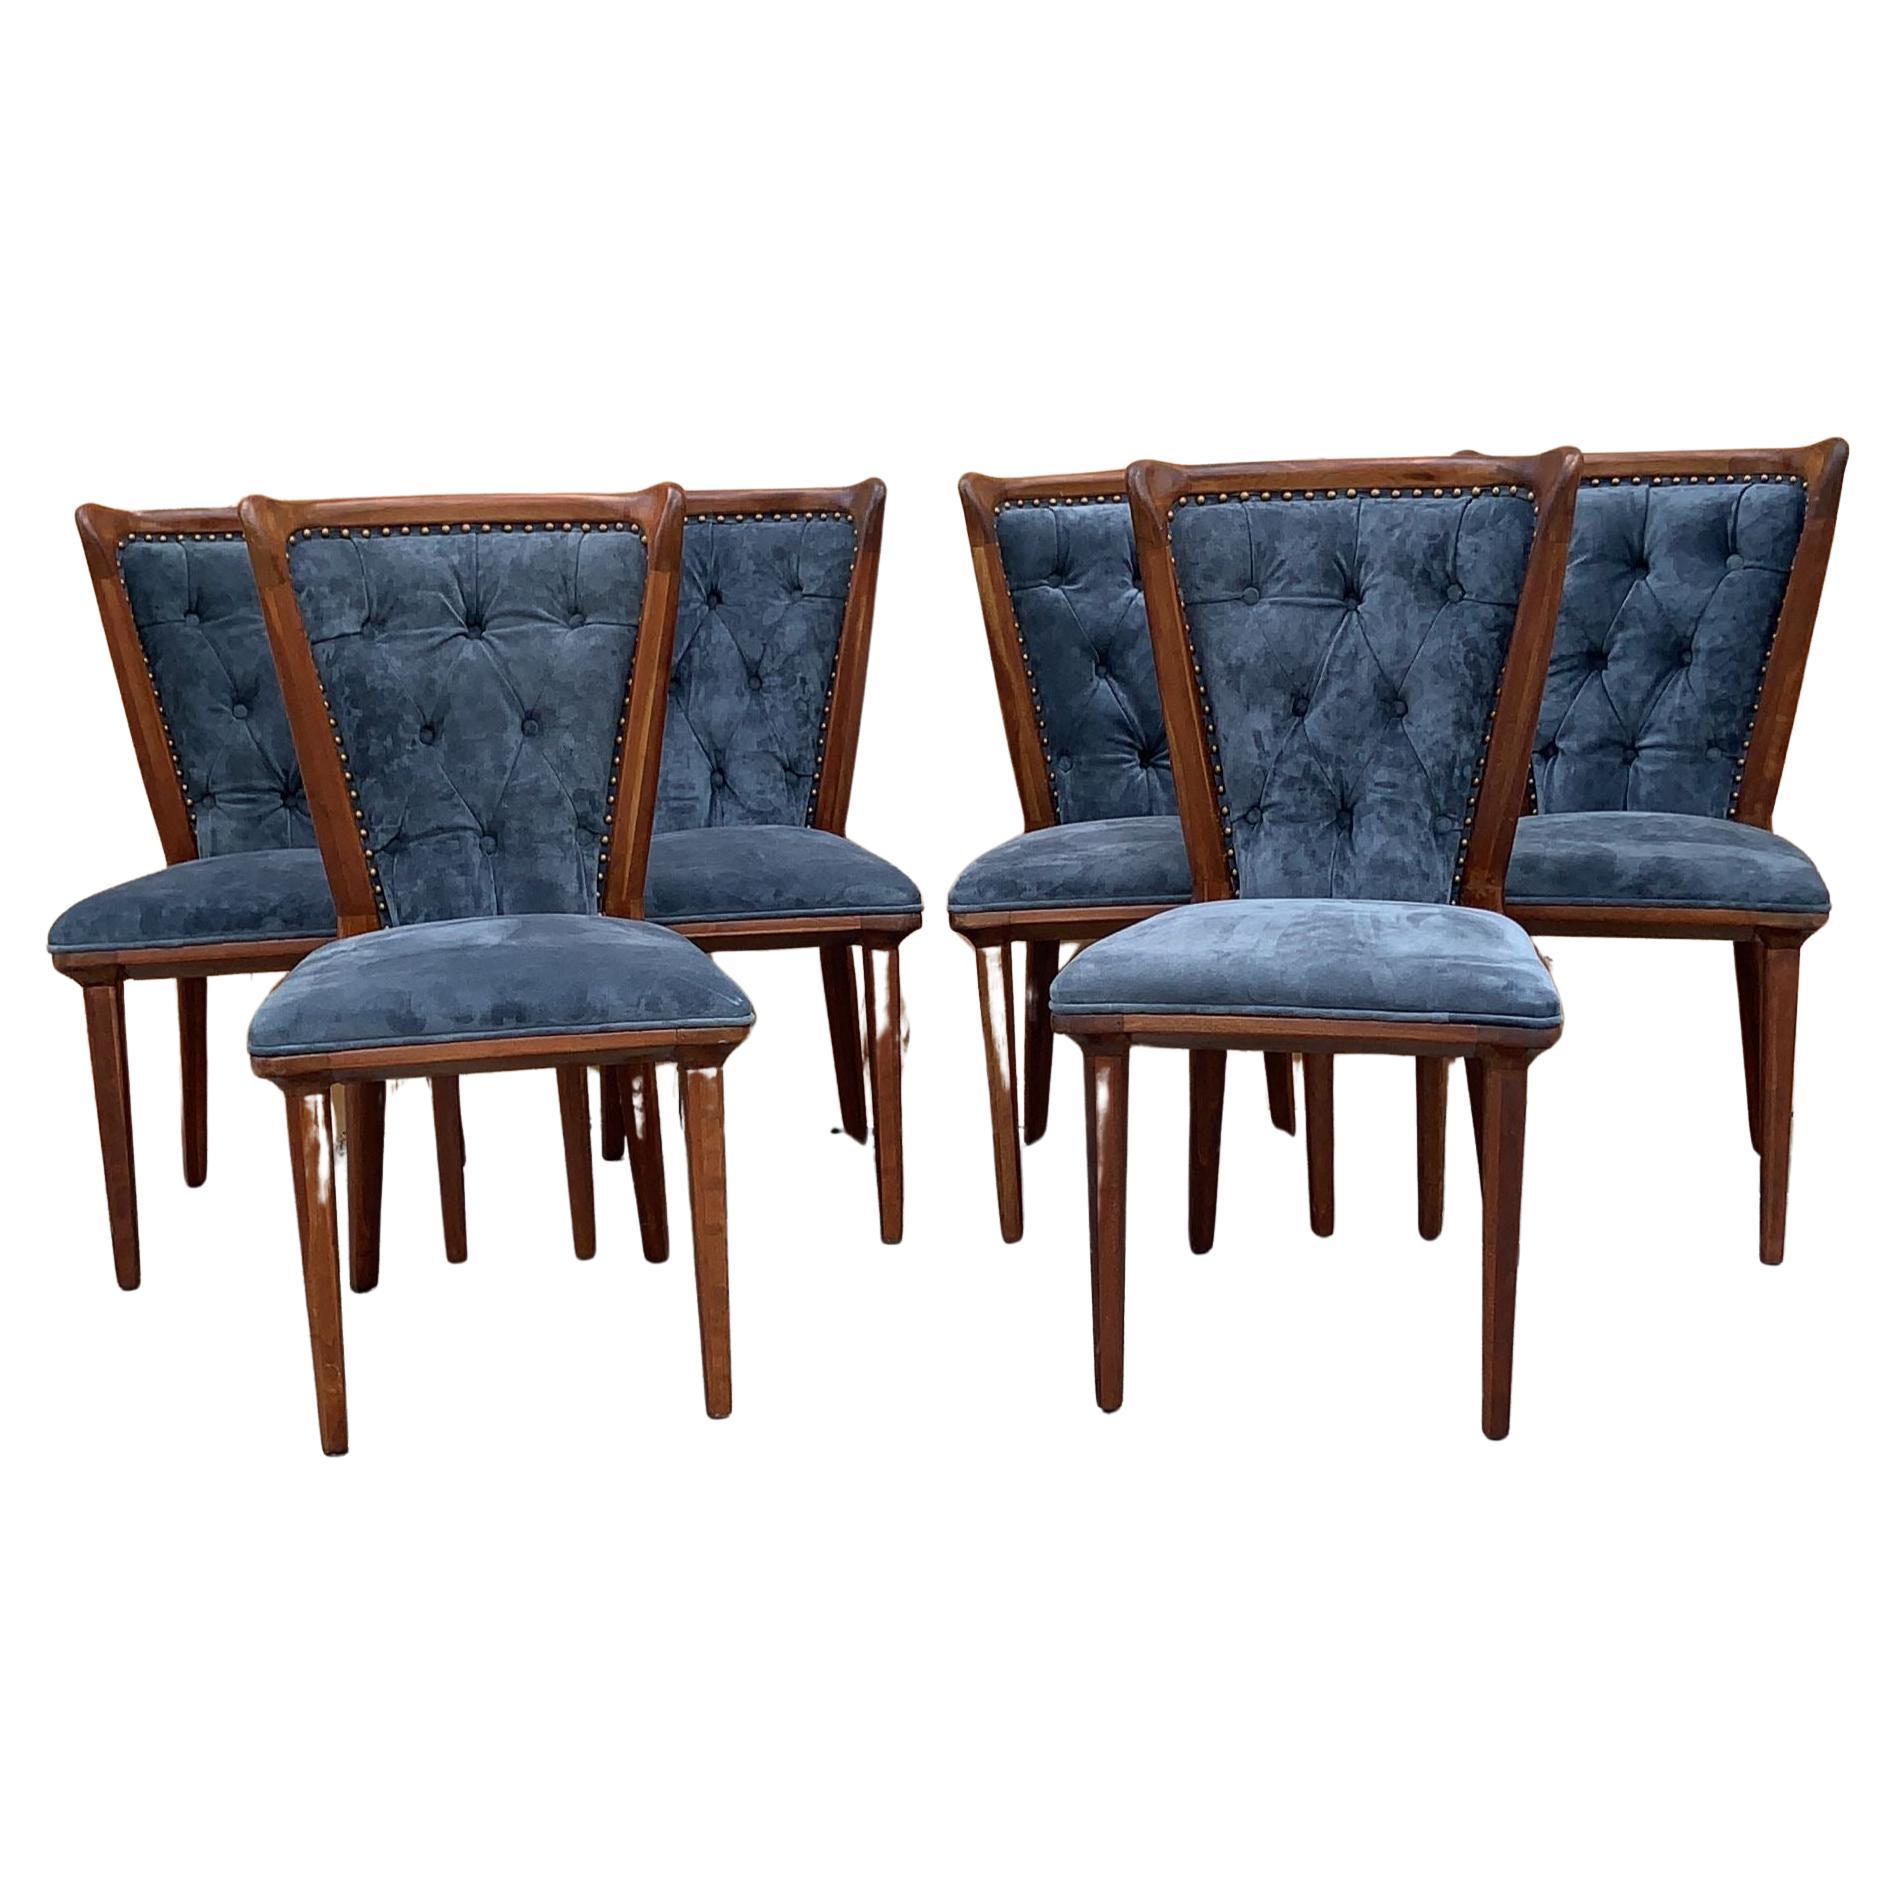 Art Deco Suede Sculptural Curved Back Dining Chairs Newly Upholstered - Set of 6